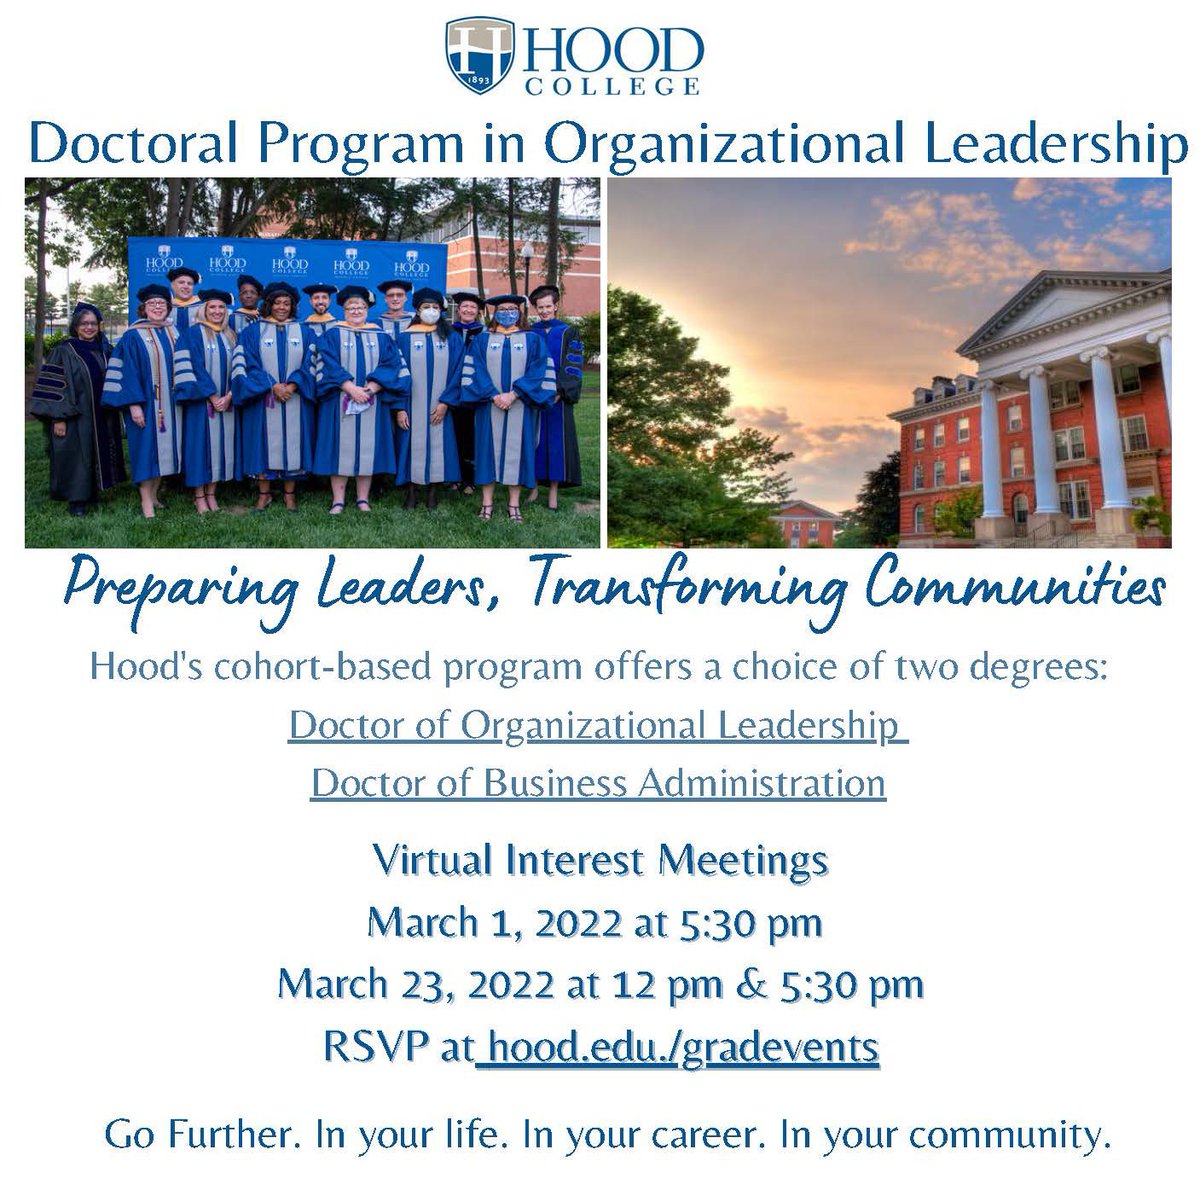 Ready to enhance your leadership capabilities? Join us at our March virtual doctoral interest meetings to learn about our DOL & our DBA degree programs! Register at hood.edu/gradevents
#HoodGradSchool #HoodProud